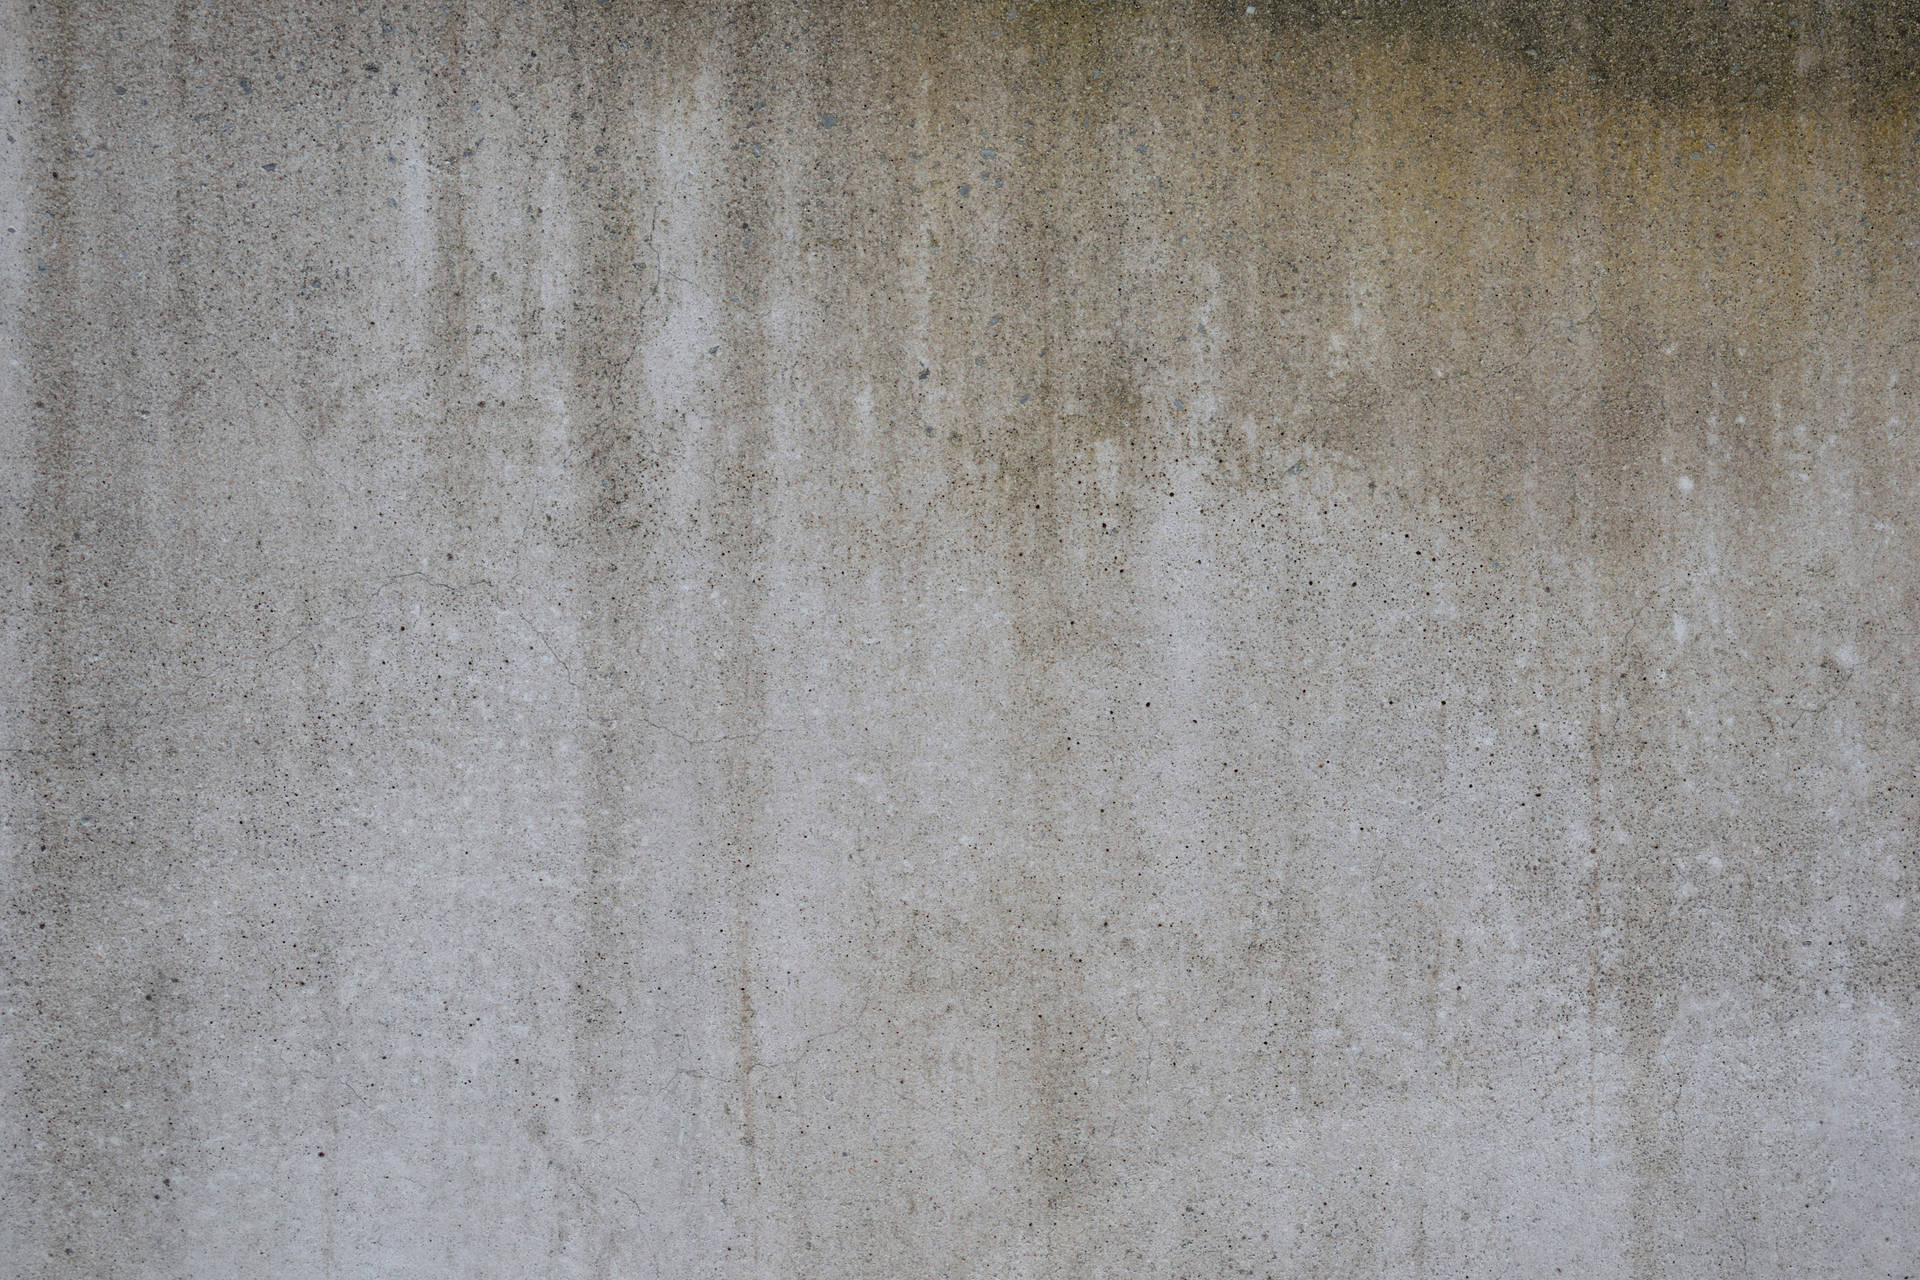 Simple Hd Concrete Wall Background